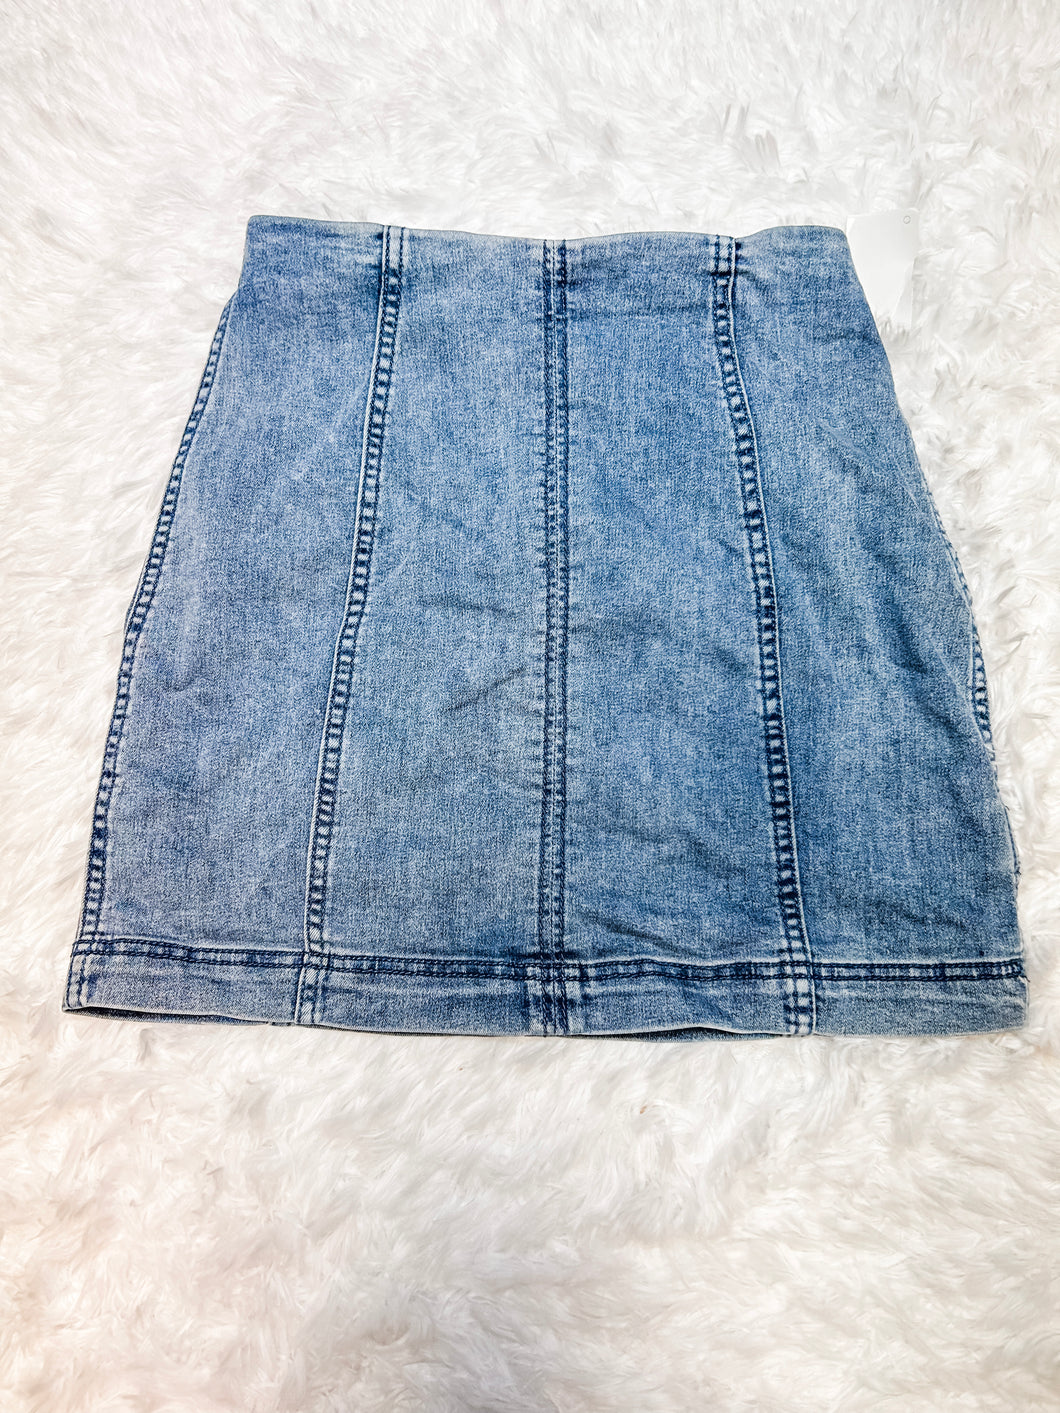 Free People Short Skirt Size Extra Small M0375